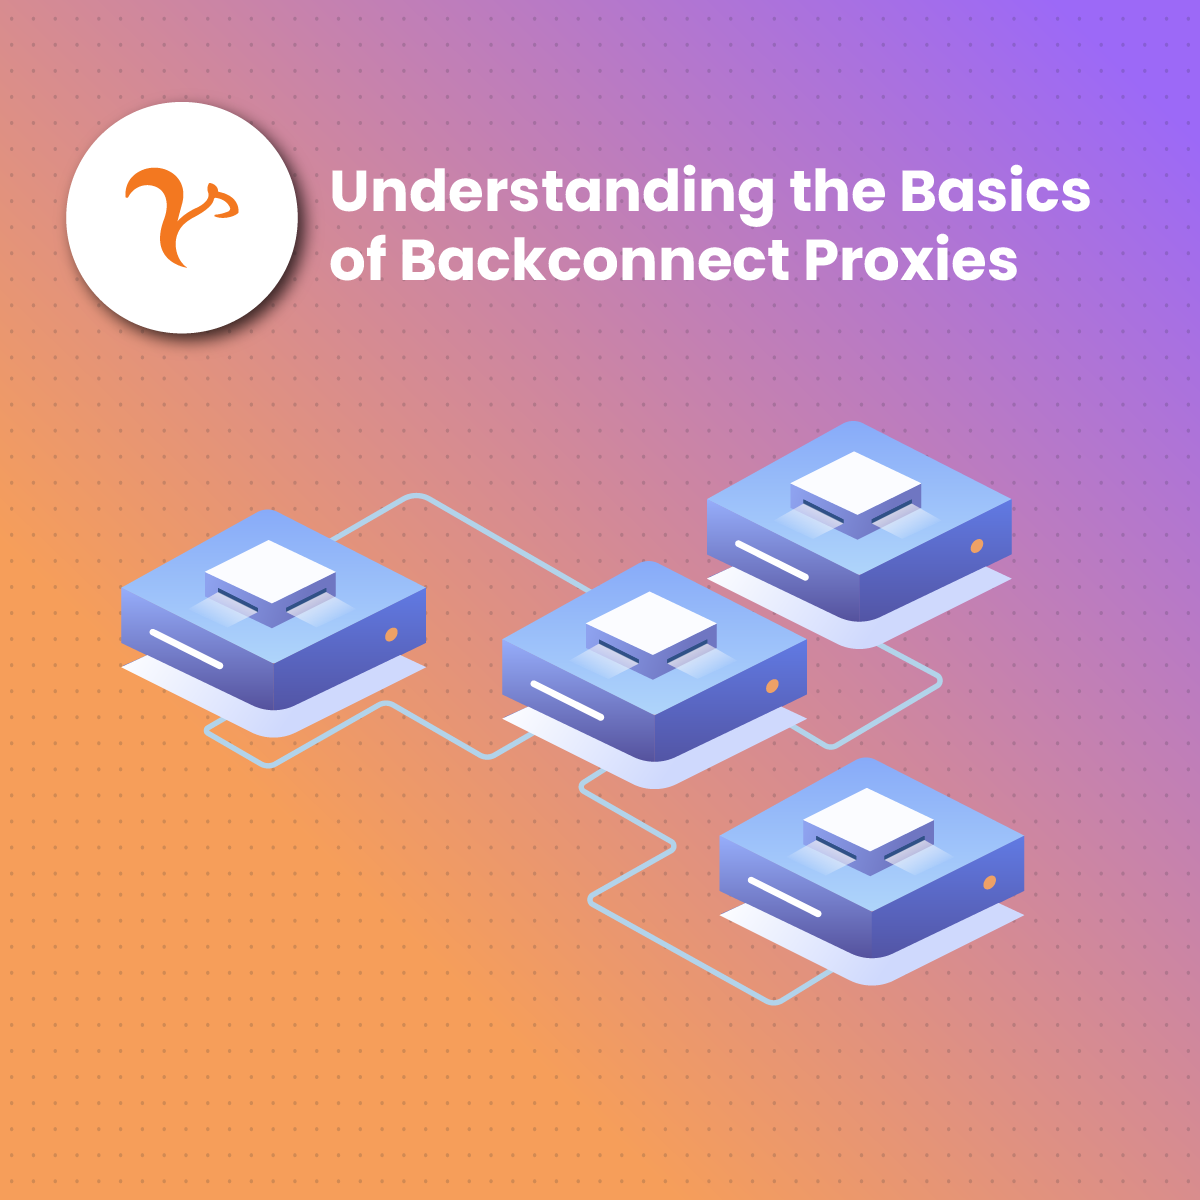 Understanding the Basics of Backconnect Proxies